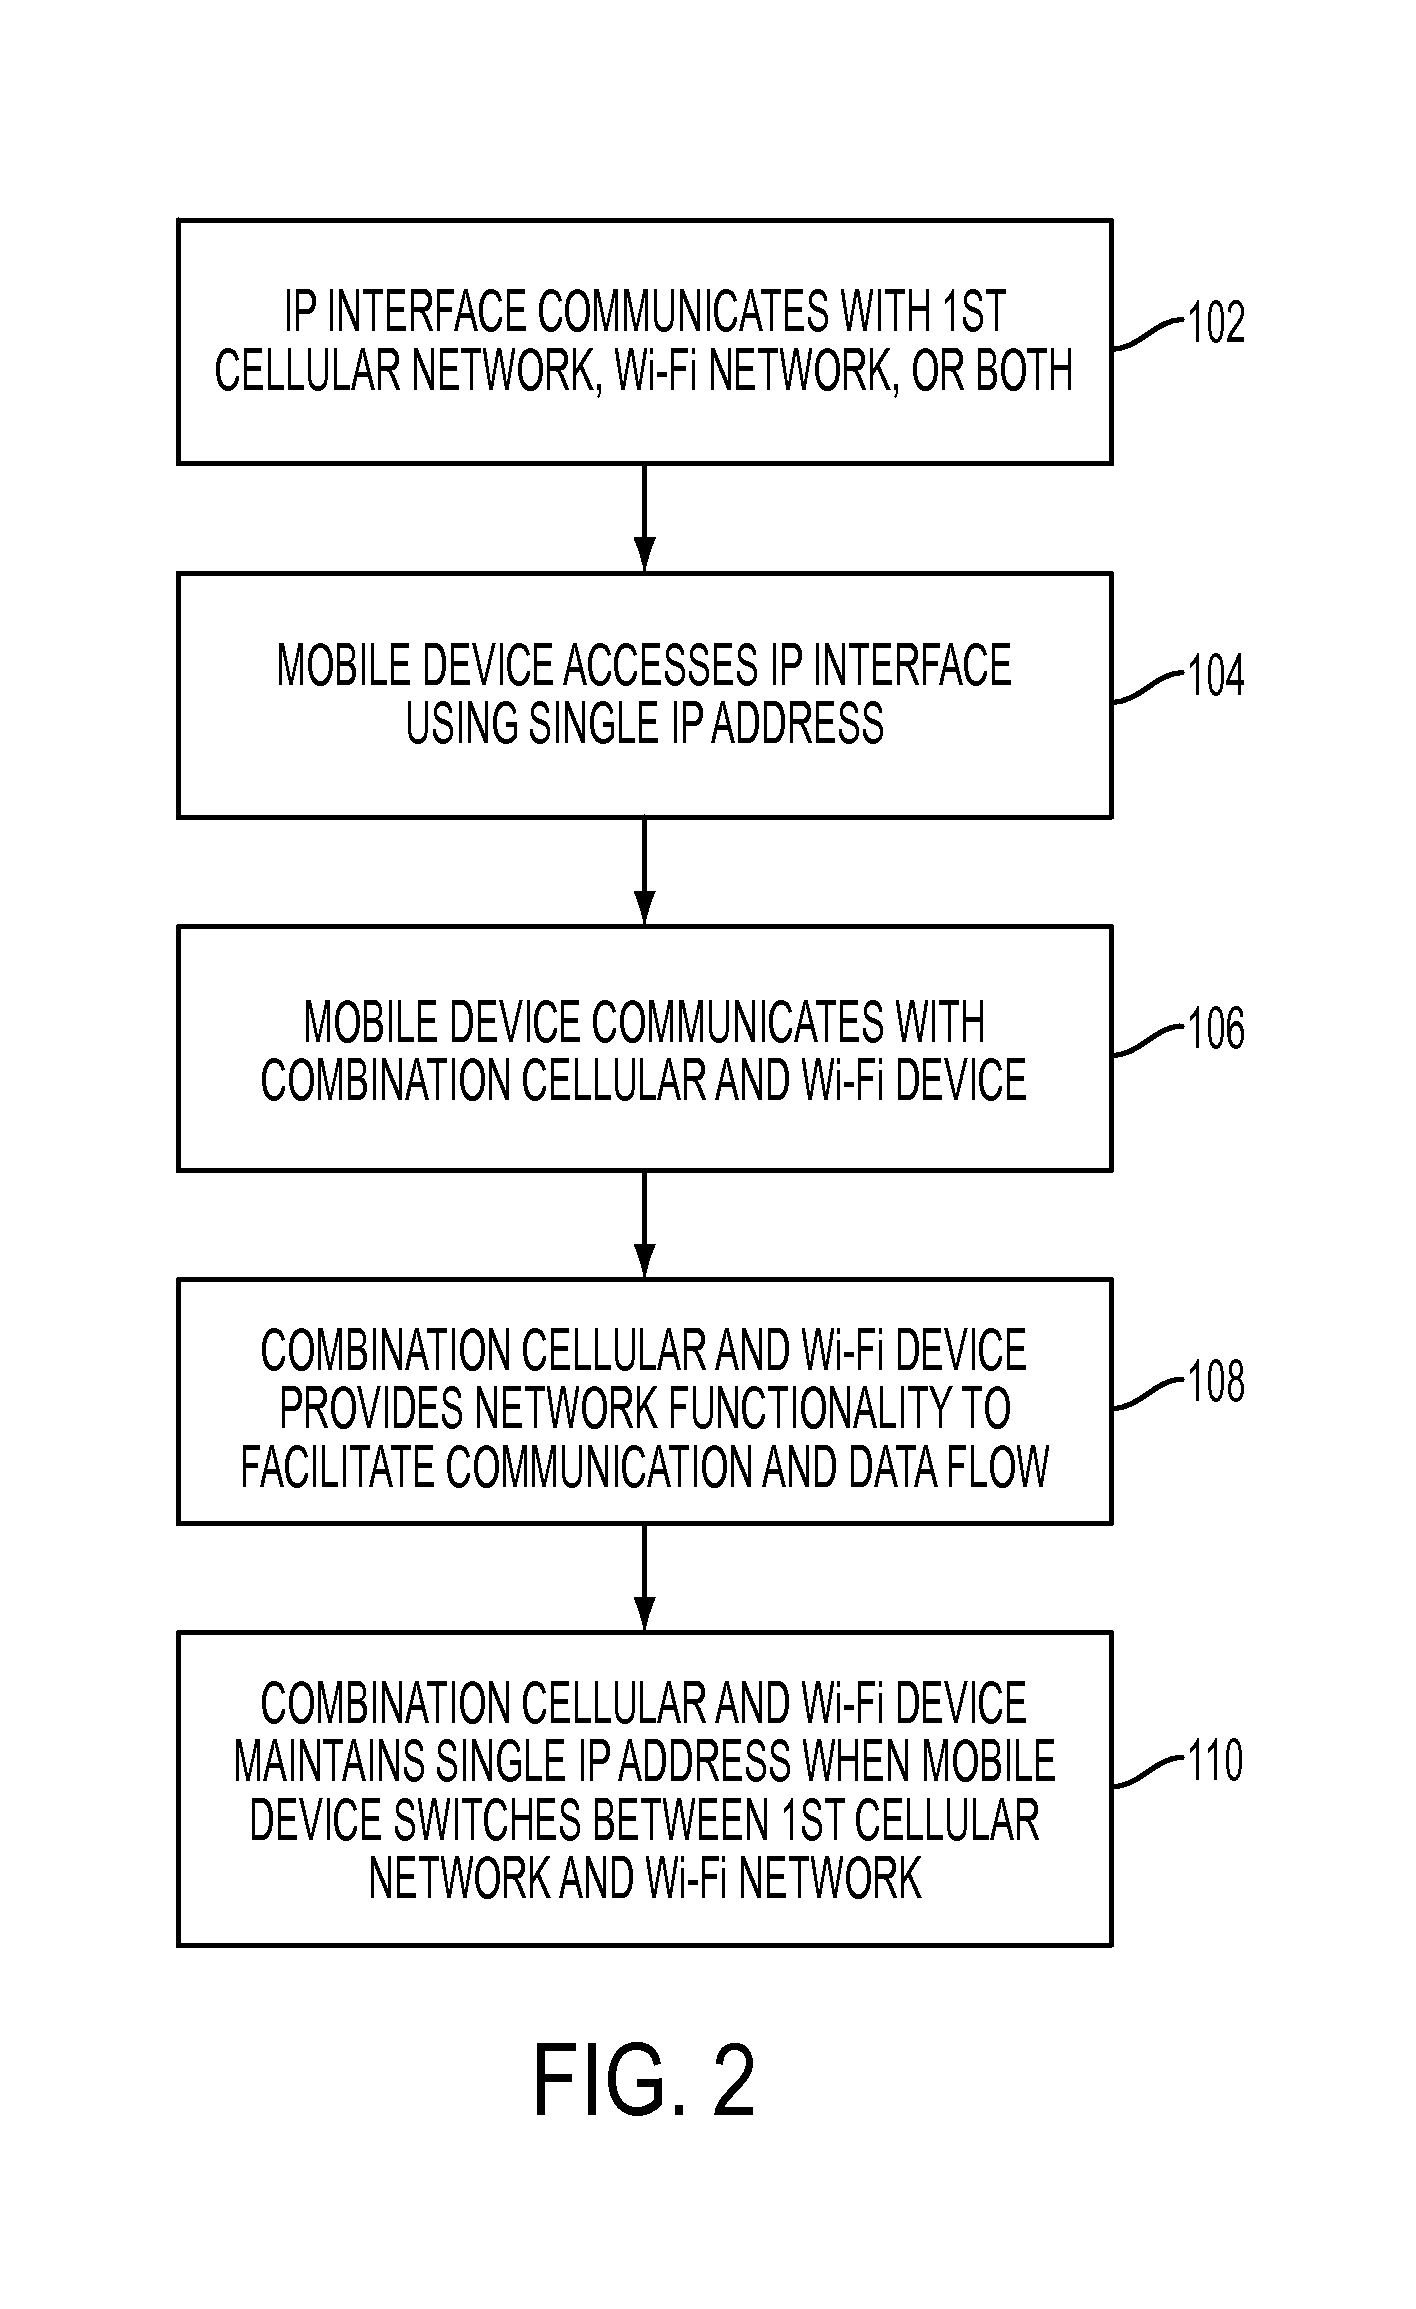 Combination cellular and wi-fi hardware device